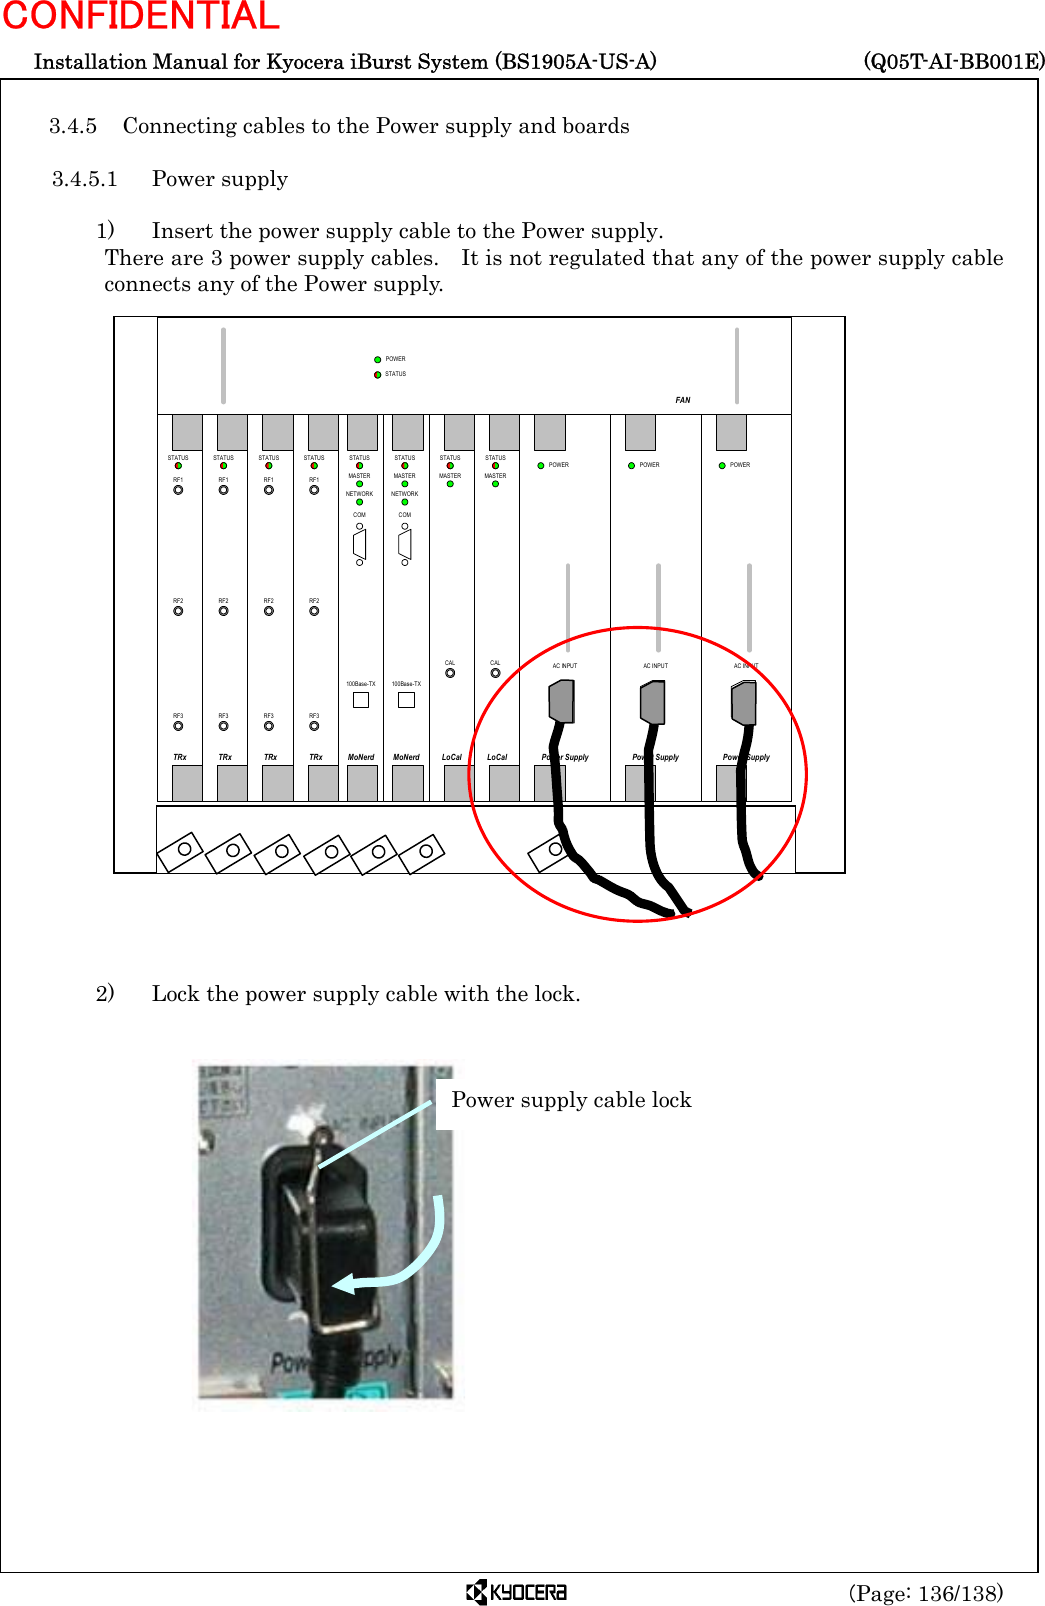  Installation Manual for Kyocera iBurst System (BS1905A-US-A)     (Q05T-AI-BB001E) (Page: 136/138) CONFIDENTIAL  3.4.5 Connecting cables to the Power supply and boards  3.4.5.1 Power supply  1)    Insert the power supply cable to the Power supply. There are 3 power supply cables.    It is not regulated that any of the power supply cable connects any of the Power supply.                           2)    Lock the power supply cable with the lock.                  Power supply cable lock RF1RF2RF3TRxSTATUSRF1RF2RF3TRxSTATUSRF1RF2RF3TRxSTATUSRF1RF2RF3TRxSTATUSCALLoCalSTATUSMASTERCALLoCalSTATUSMASTERMoNerdSTATUSMASTERNETWORKCOM100Base-TXMoNerdSTATUSMASTERNETWORKCOM100Base-TXPower SupplyPOWERAC INPUTPower SupplyPOWERAC INPUTPower SupplyPOWERAC INPUTFANPOWERSTATUS  